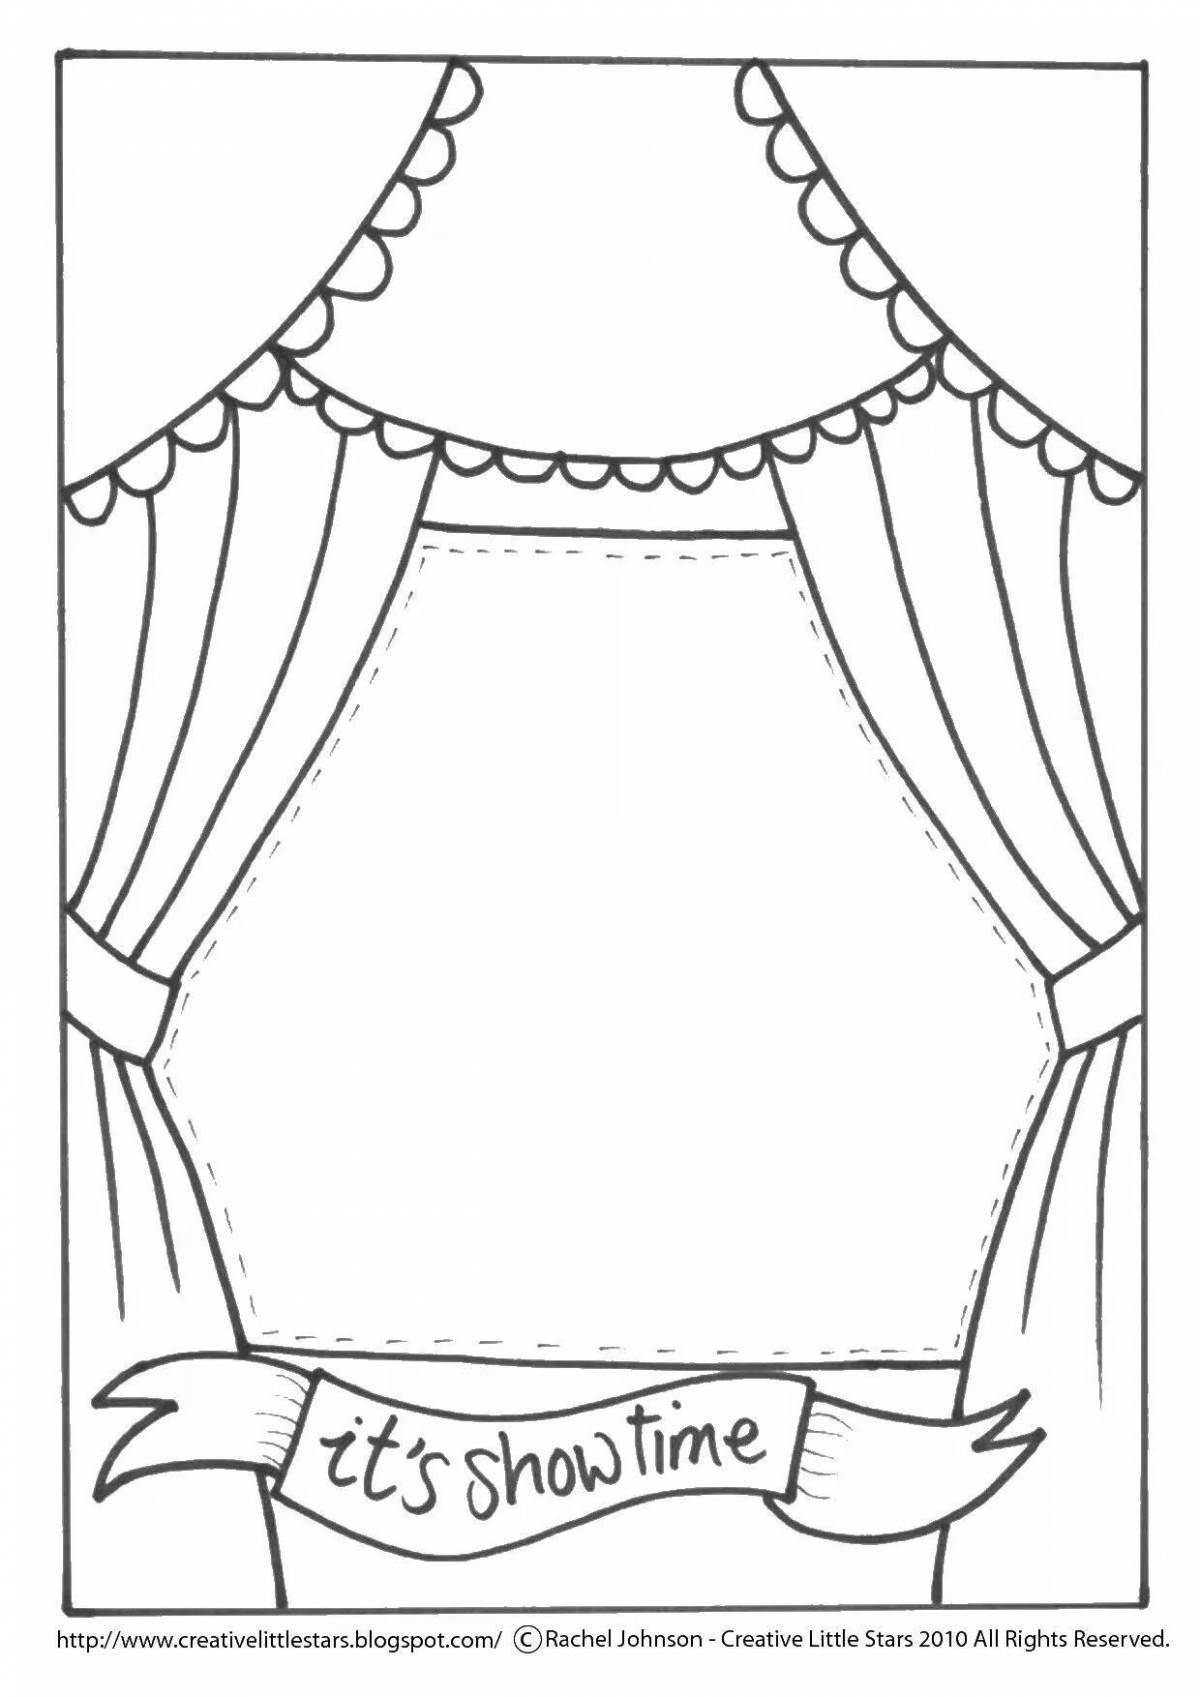 Playful theater stage coloring page for toddlers